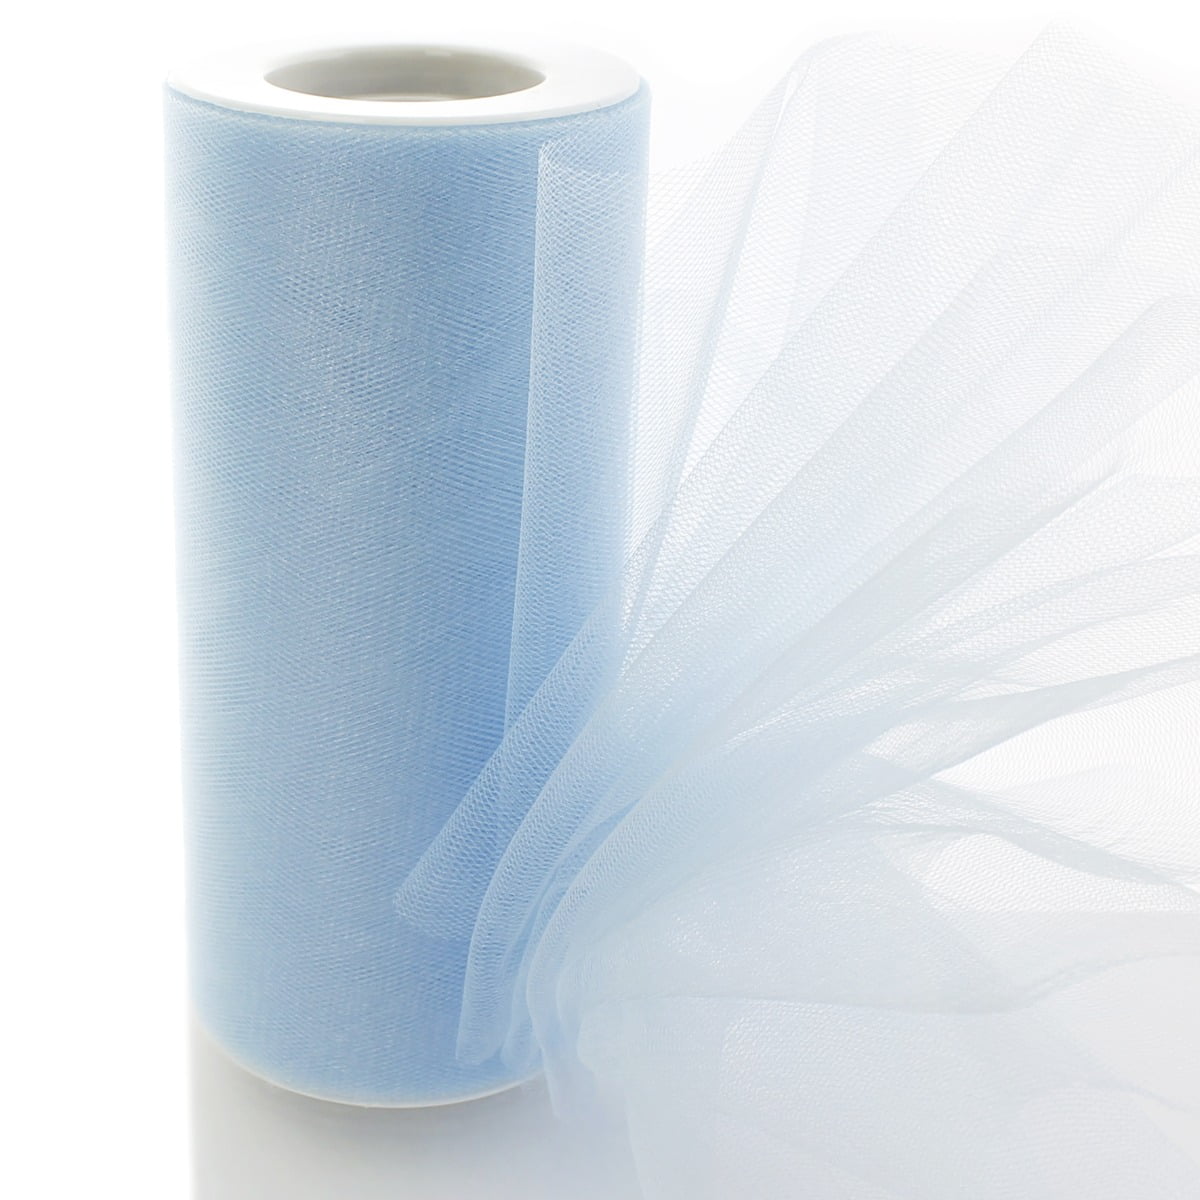 Craft Forge Tulle Fabric Roll | 6” by 100 Yards | Polyester Spool for Crafts Decorations Tutu Weddings Costumes Skirts Parties Gift Bow and More – by Craft